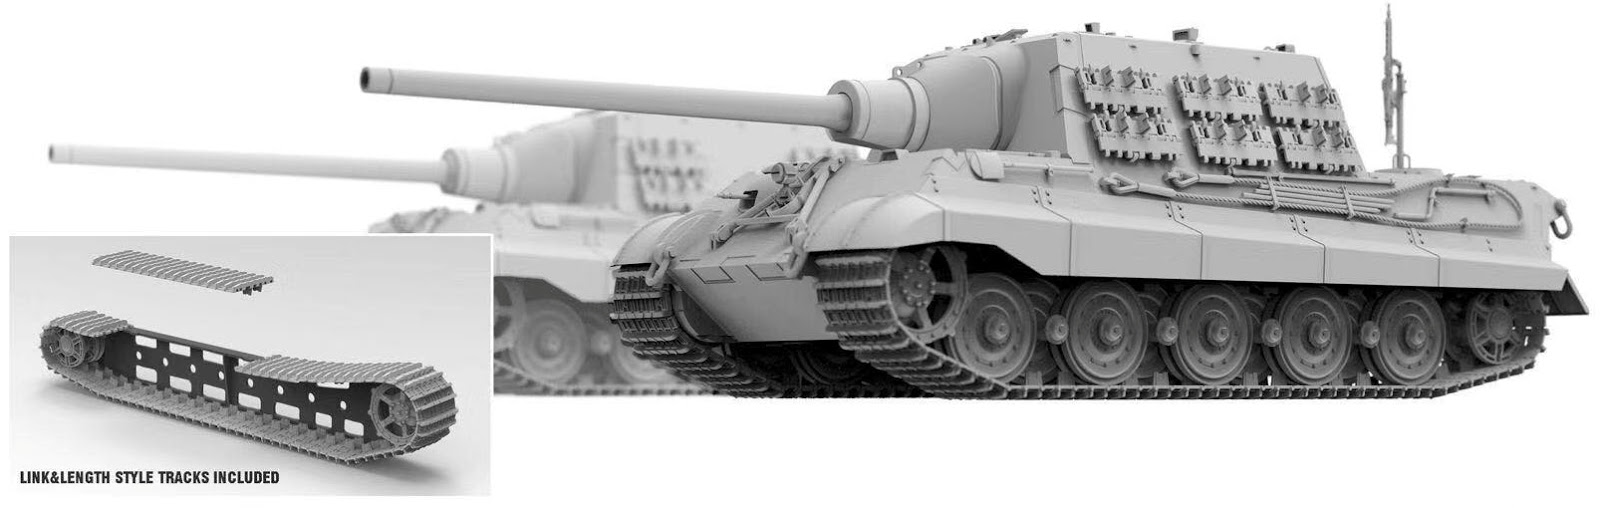 Jagdtiger Sd.Kfz.186 Early/Late Production (2 in 1)